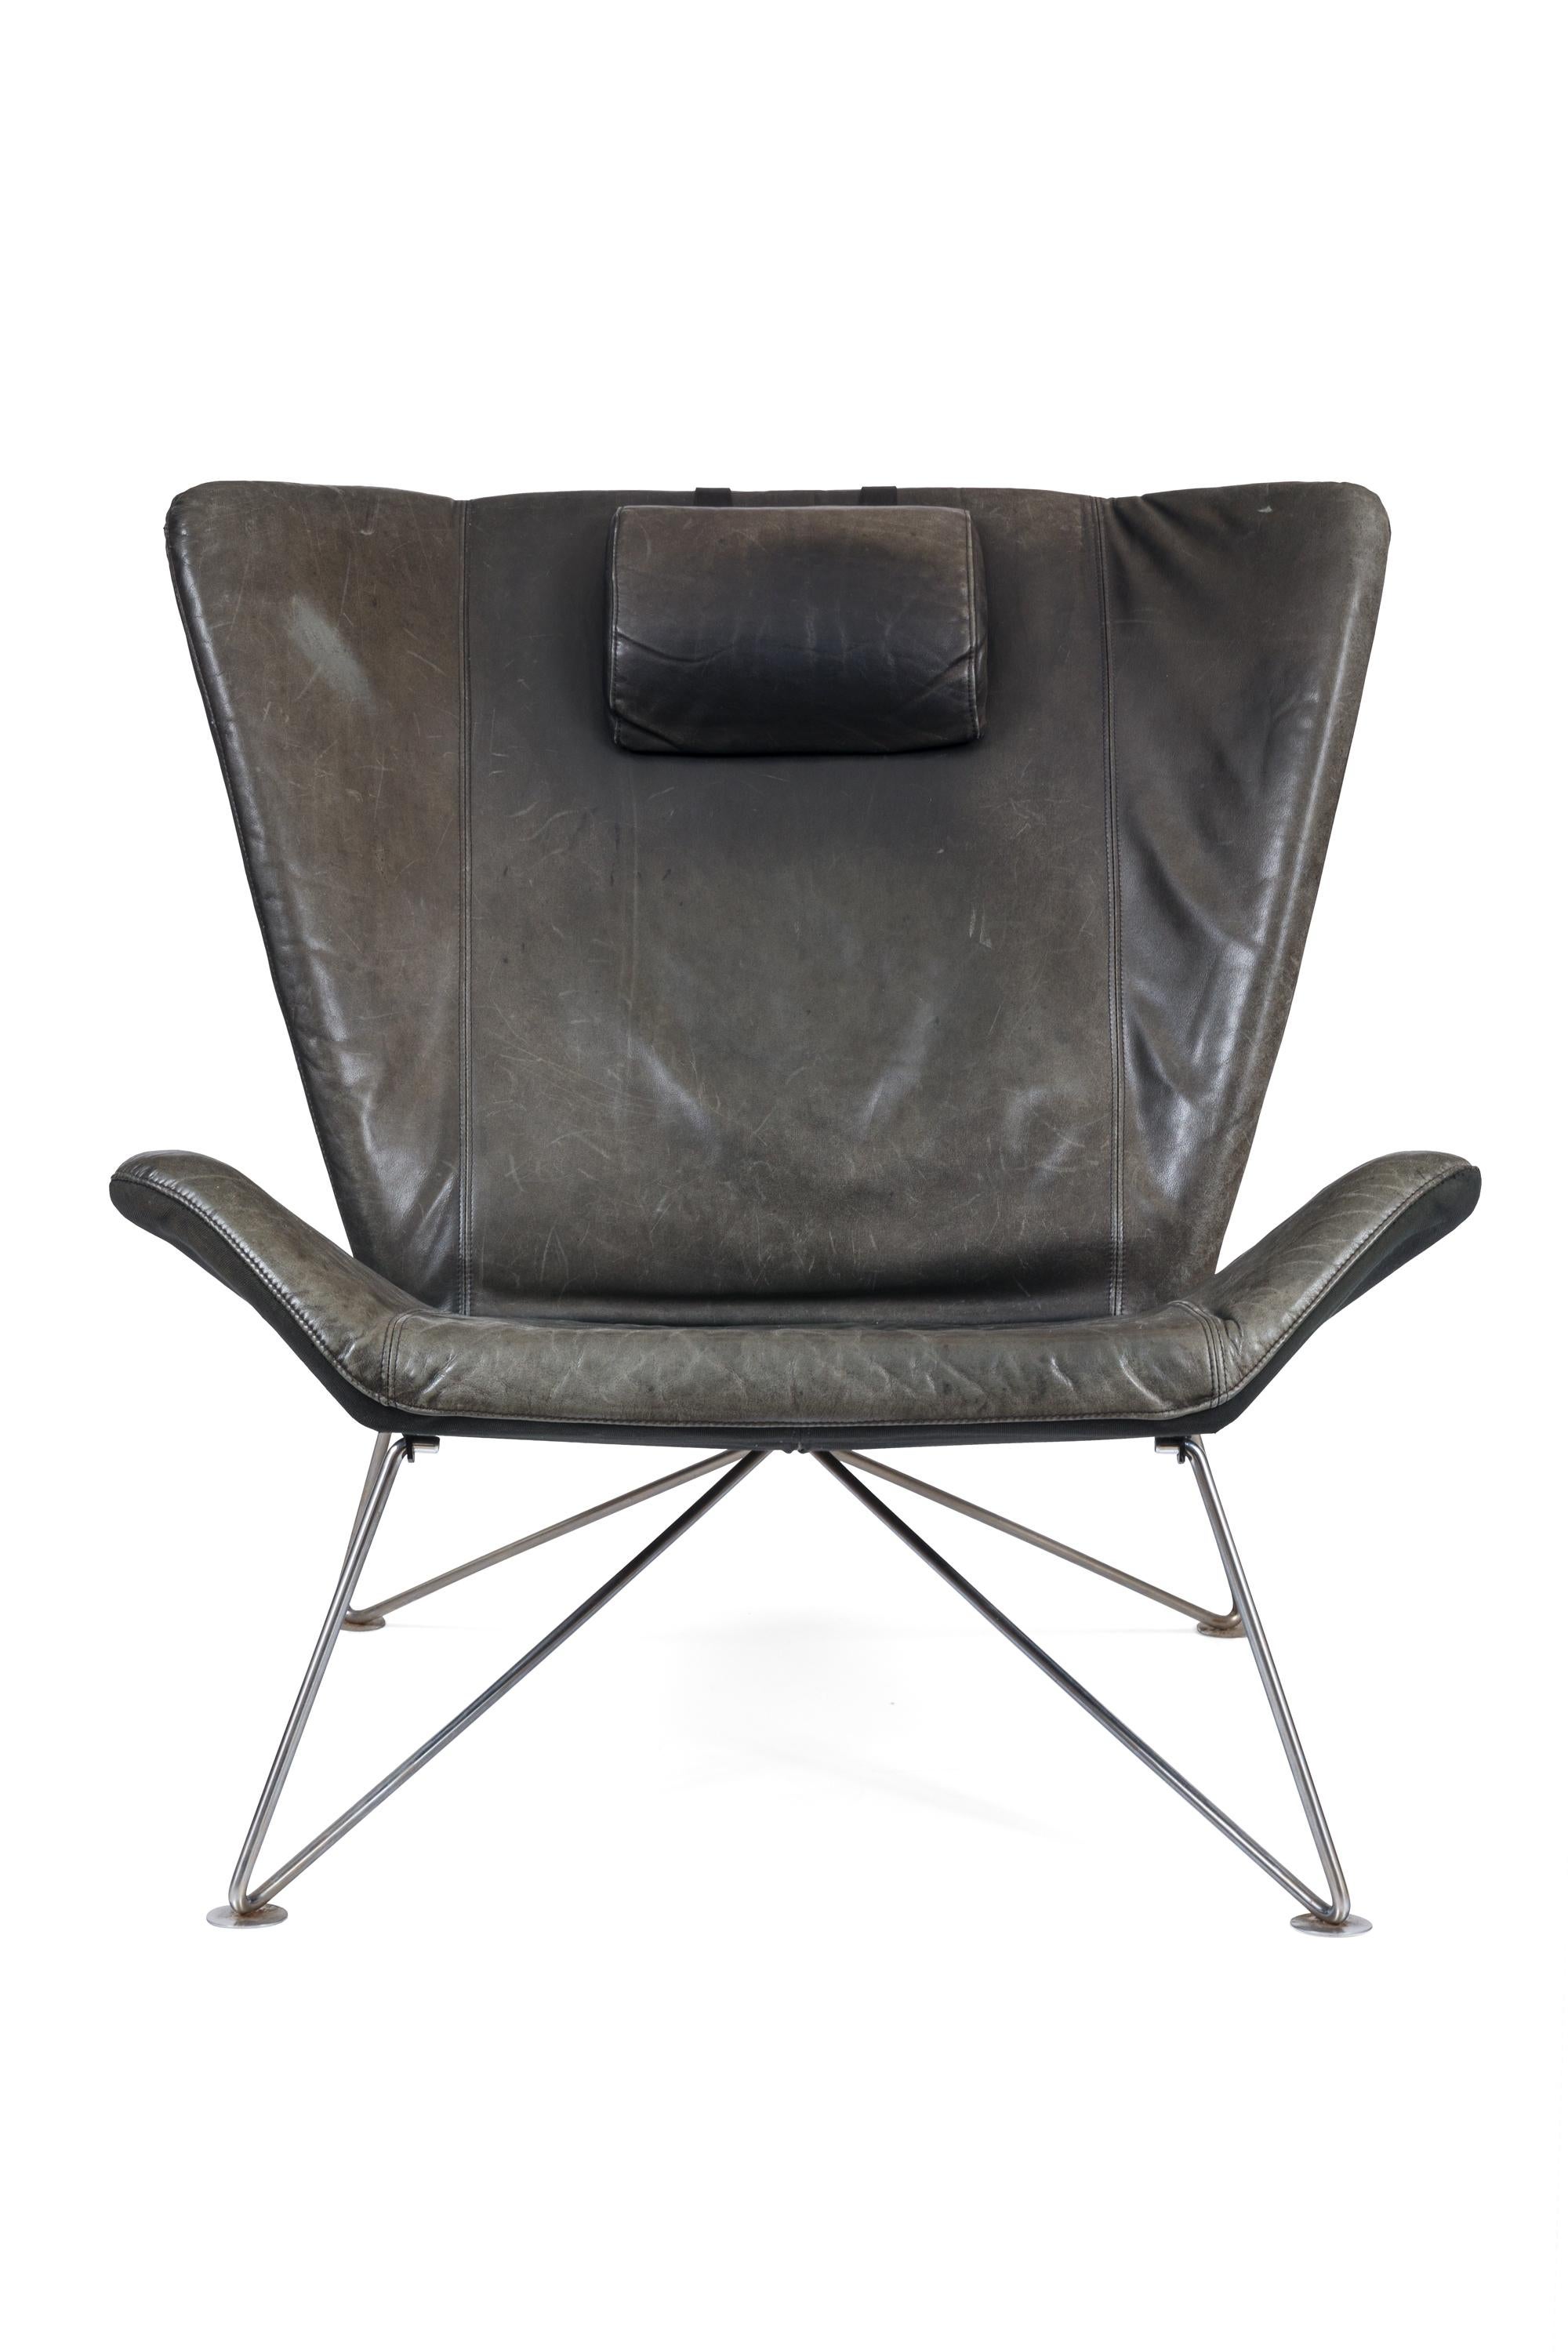 Late 20th Century Scandinavian Modern Brown Leather Lounge Chairs, Sweden, 1970s